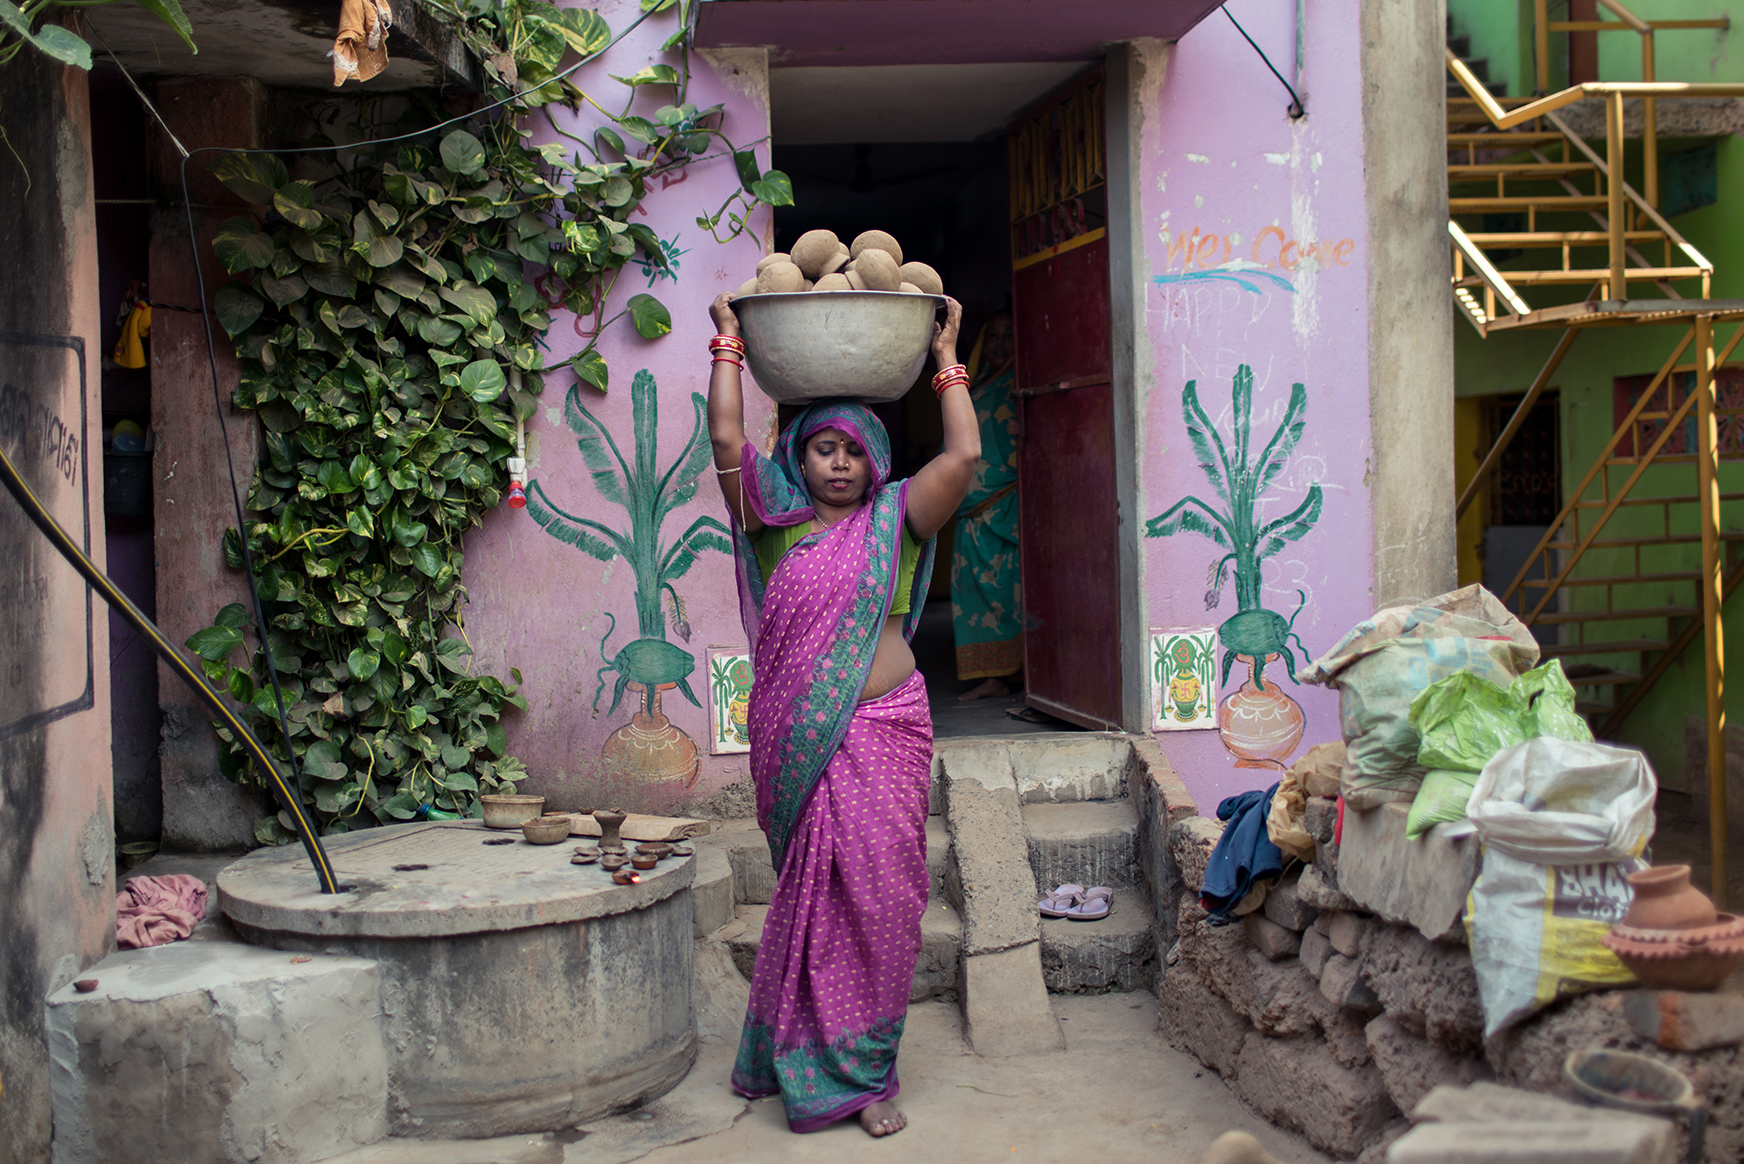 Rina carries her pottery in Odisha, India